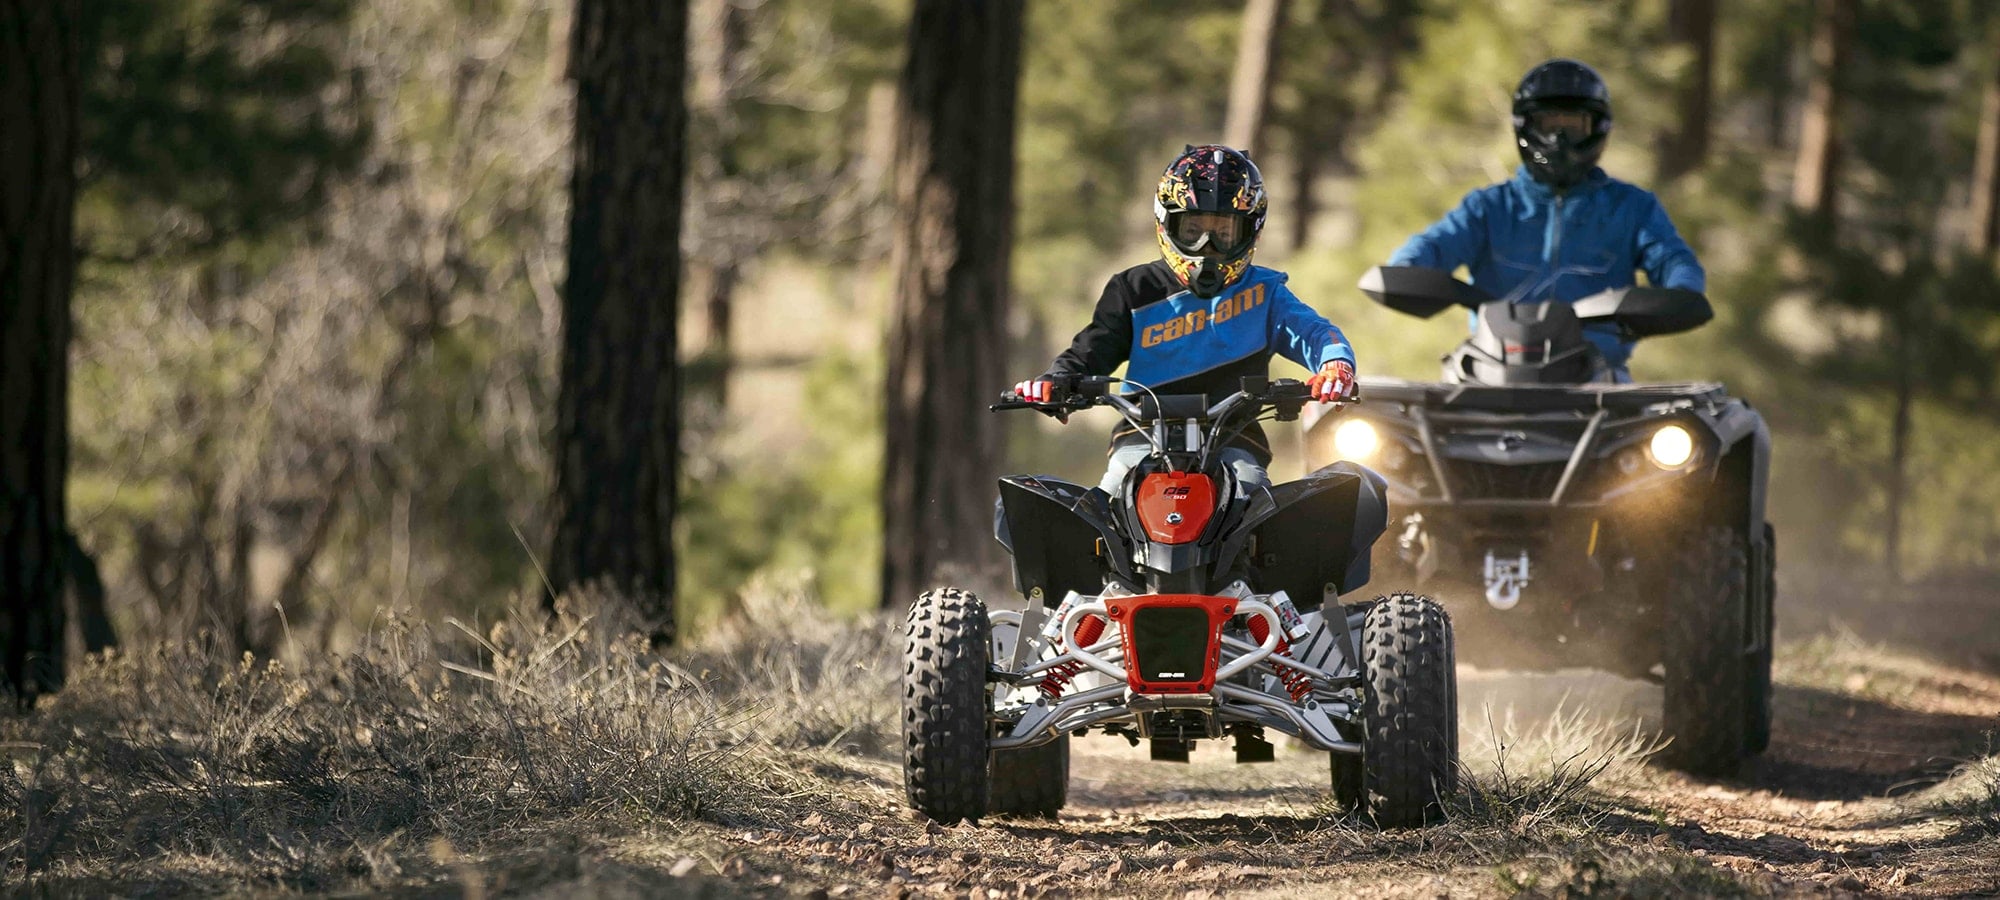 Banner ATV COPII Can-am  Bombardier 2020 1